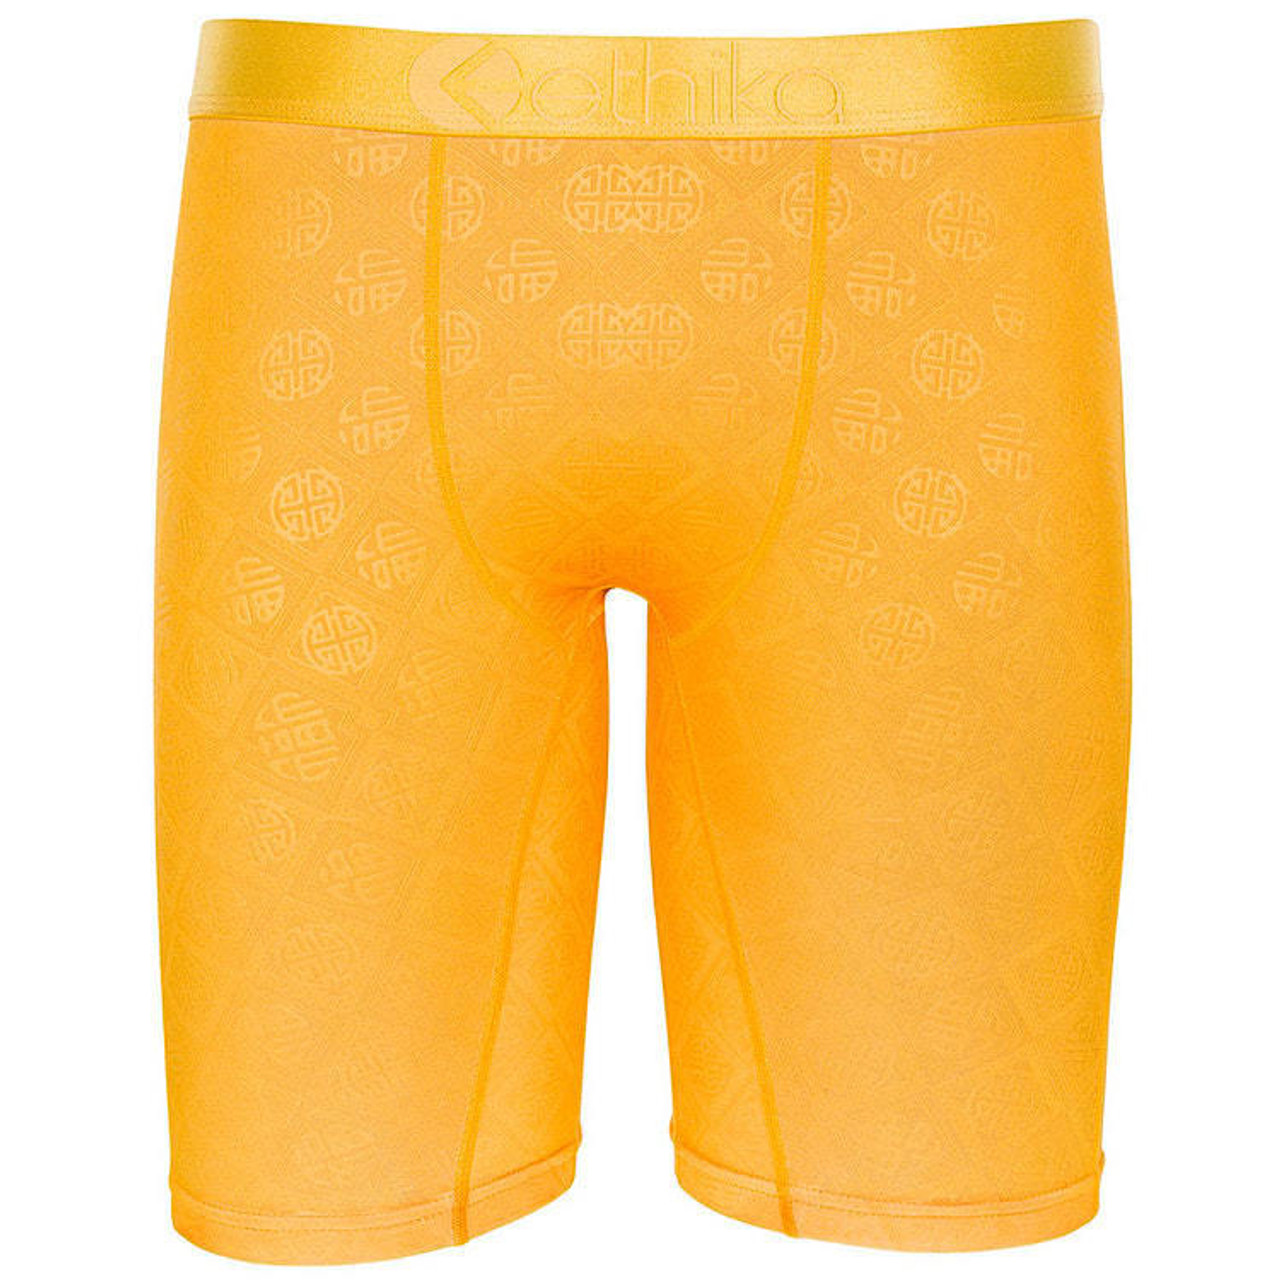 Ethika Mens Staple Boxer Brief  Empire Yellow (YLW, Small) at